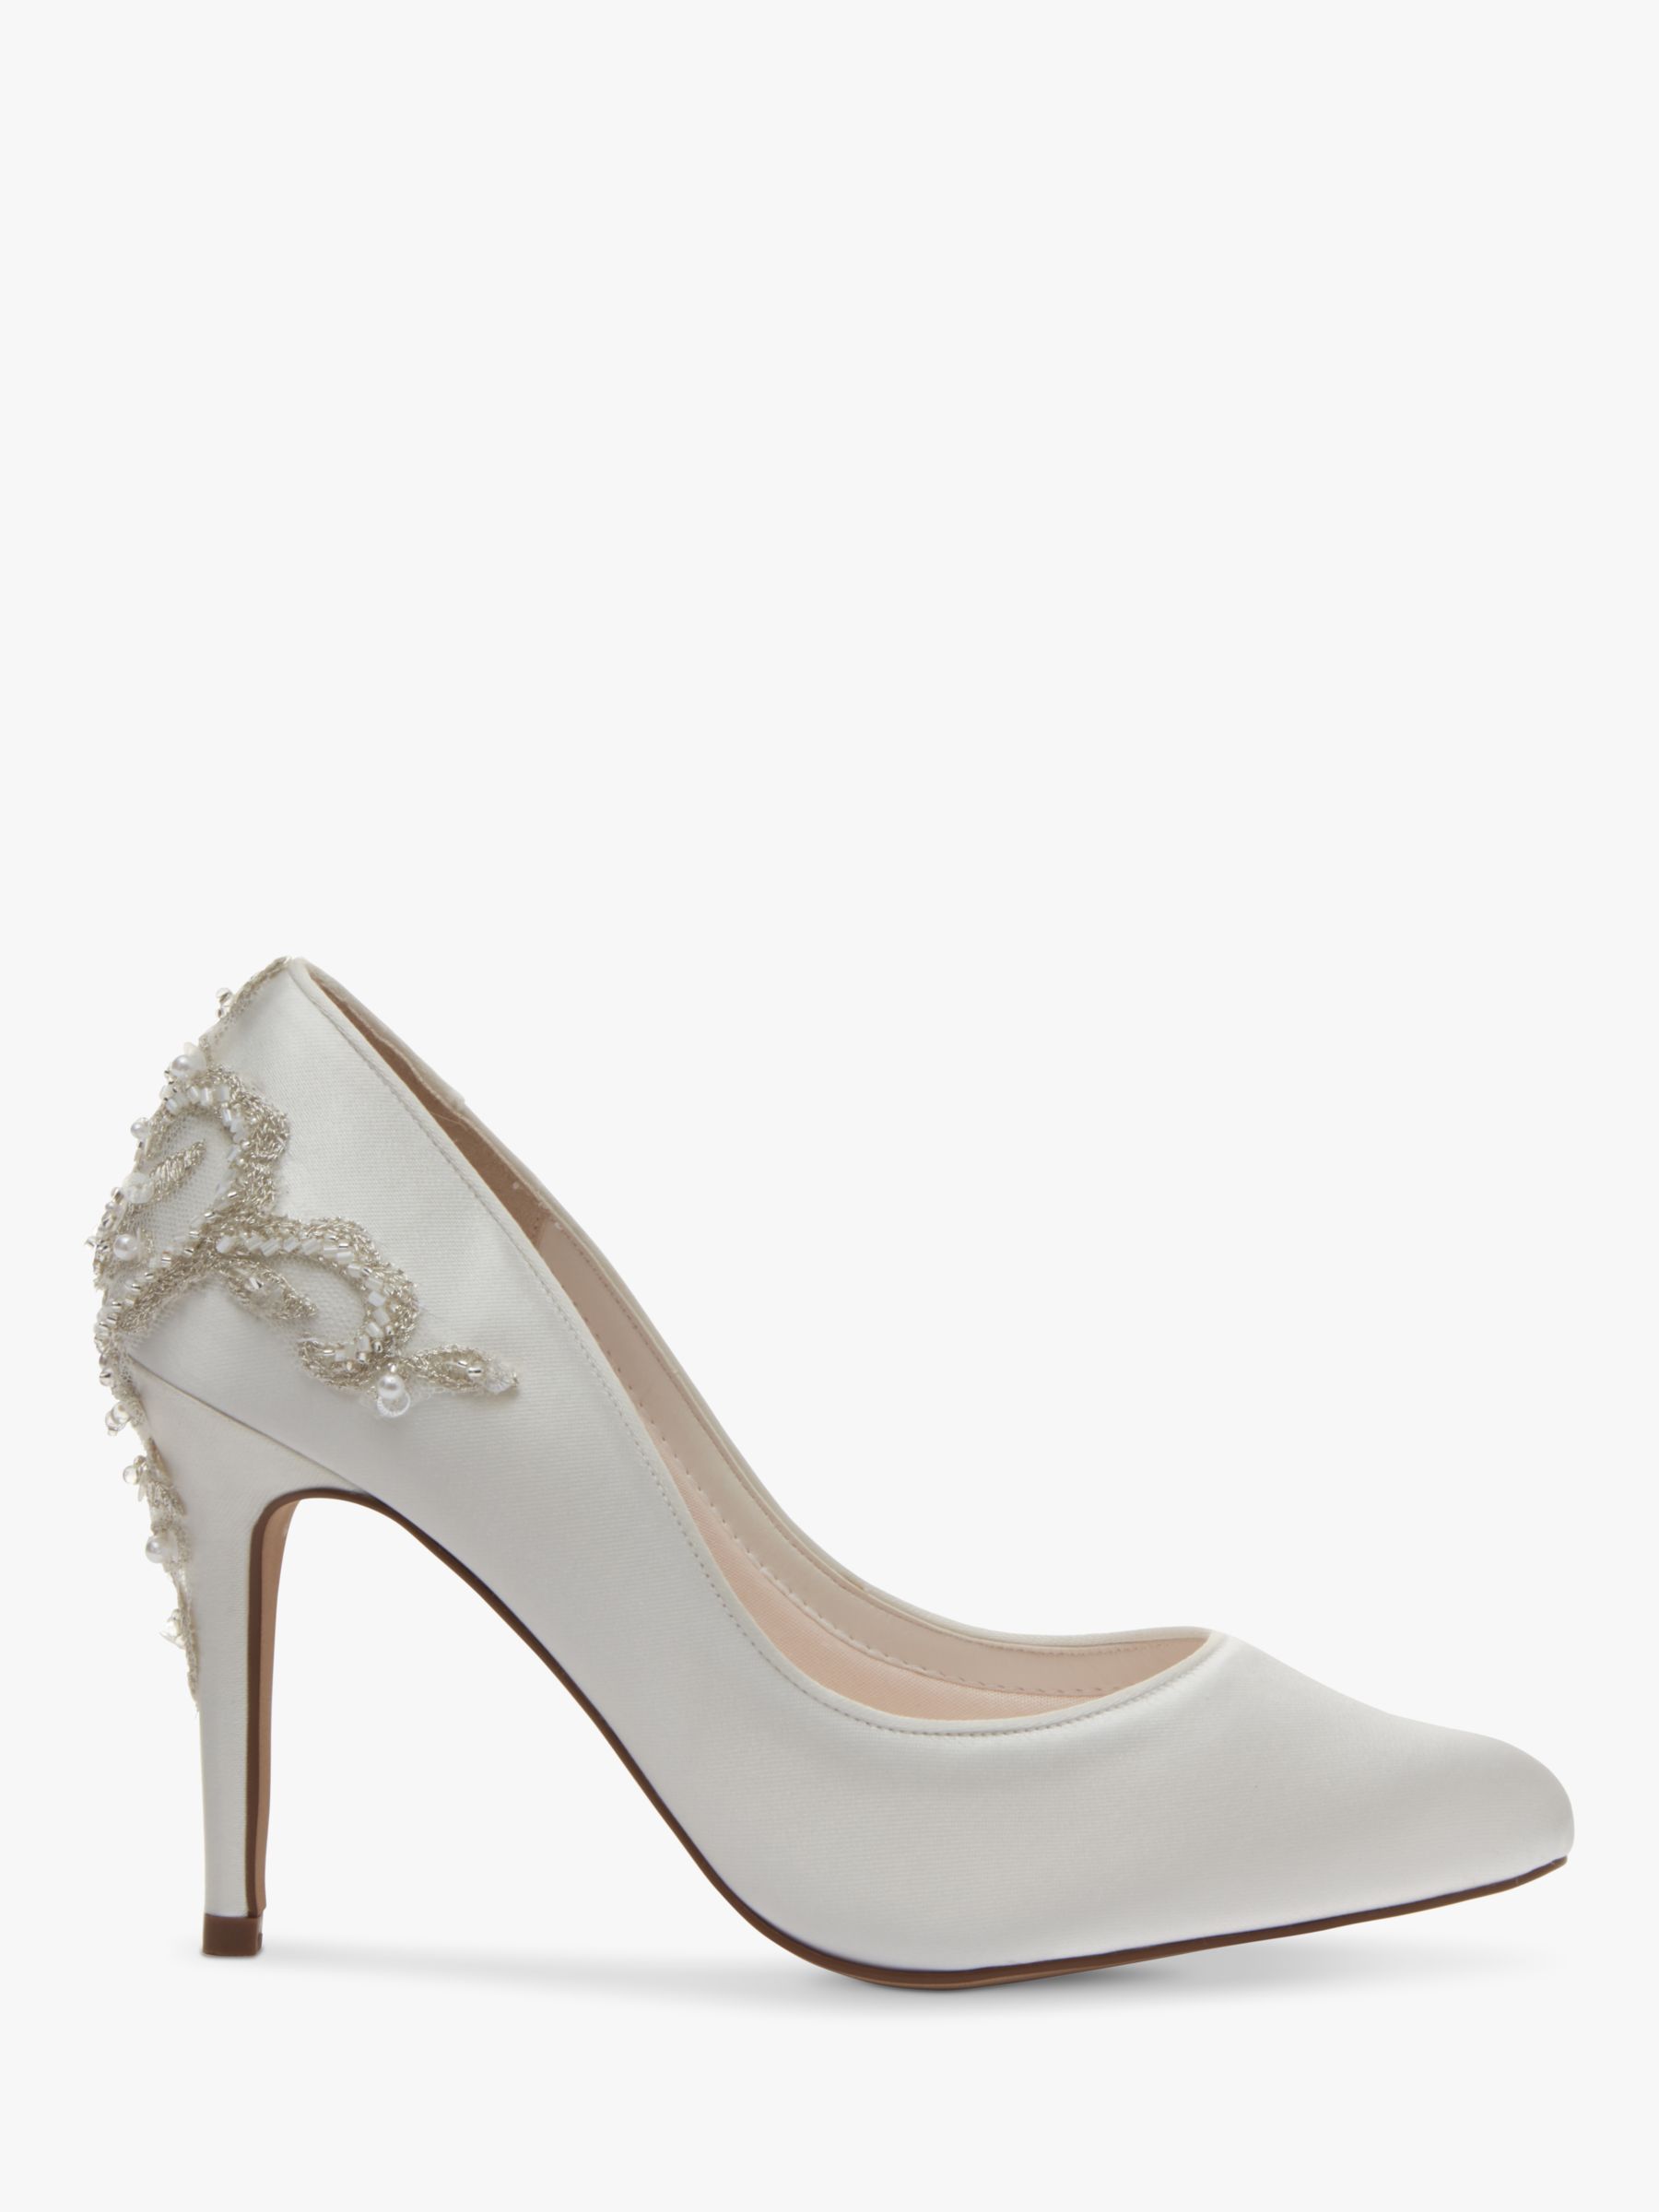 Rainbow Club Willow Embellished Court Shoes, Ivory Satin